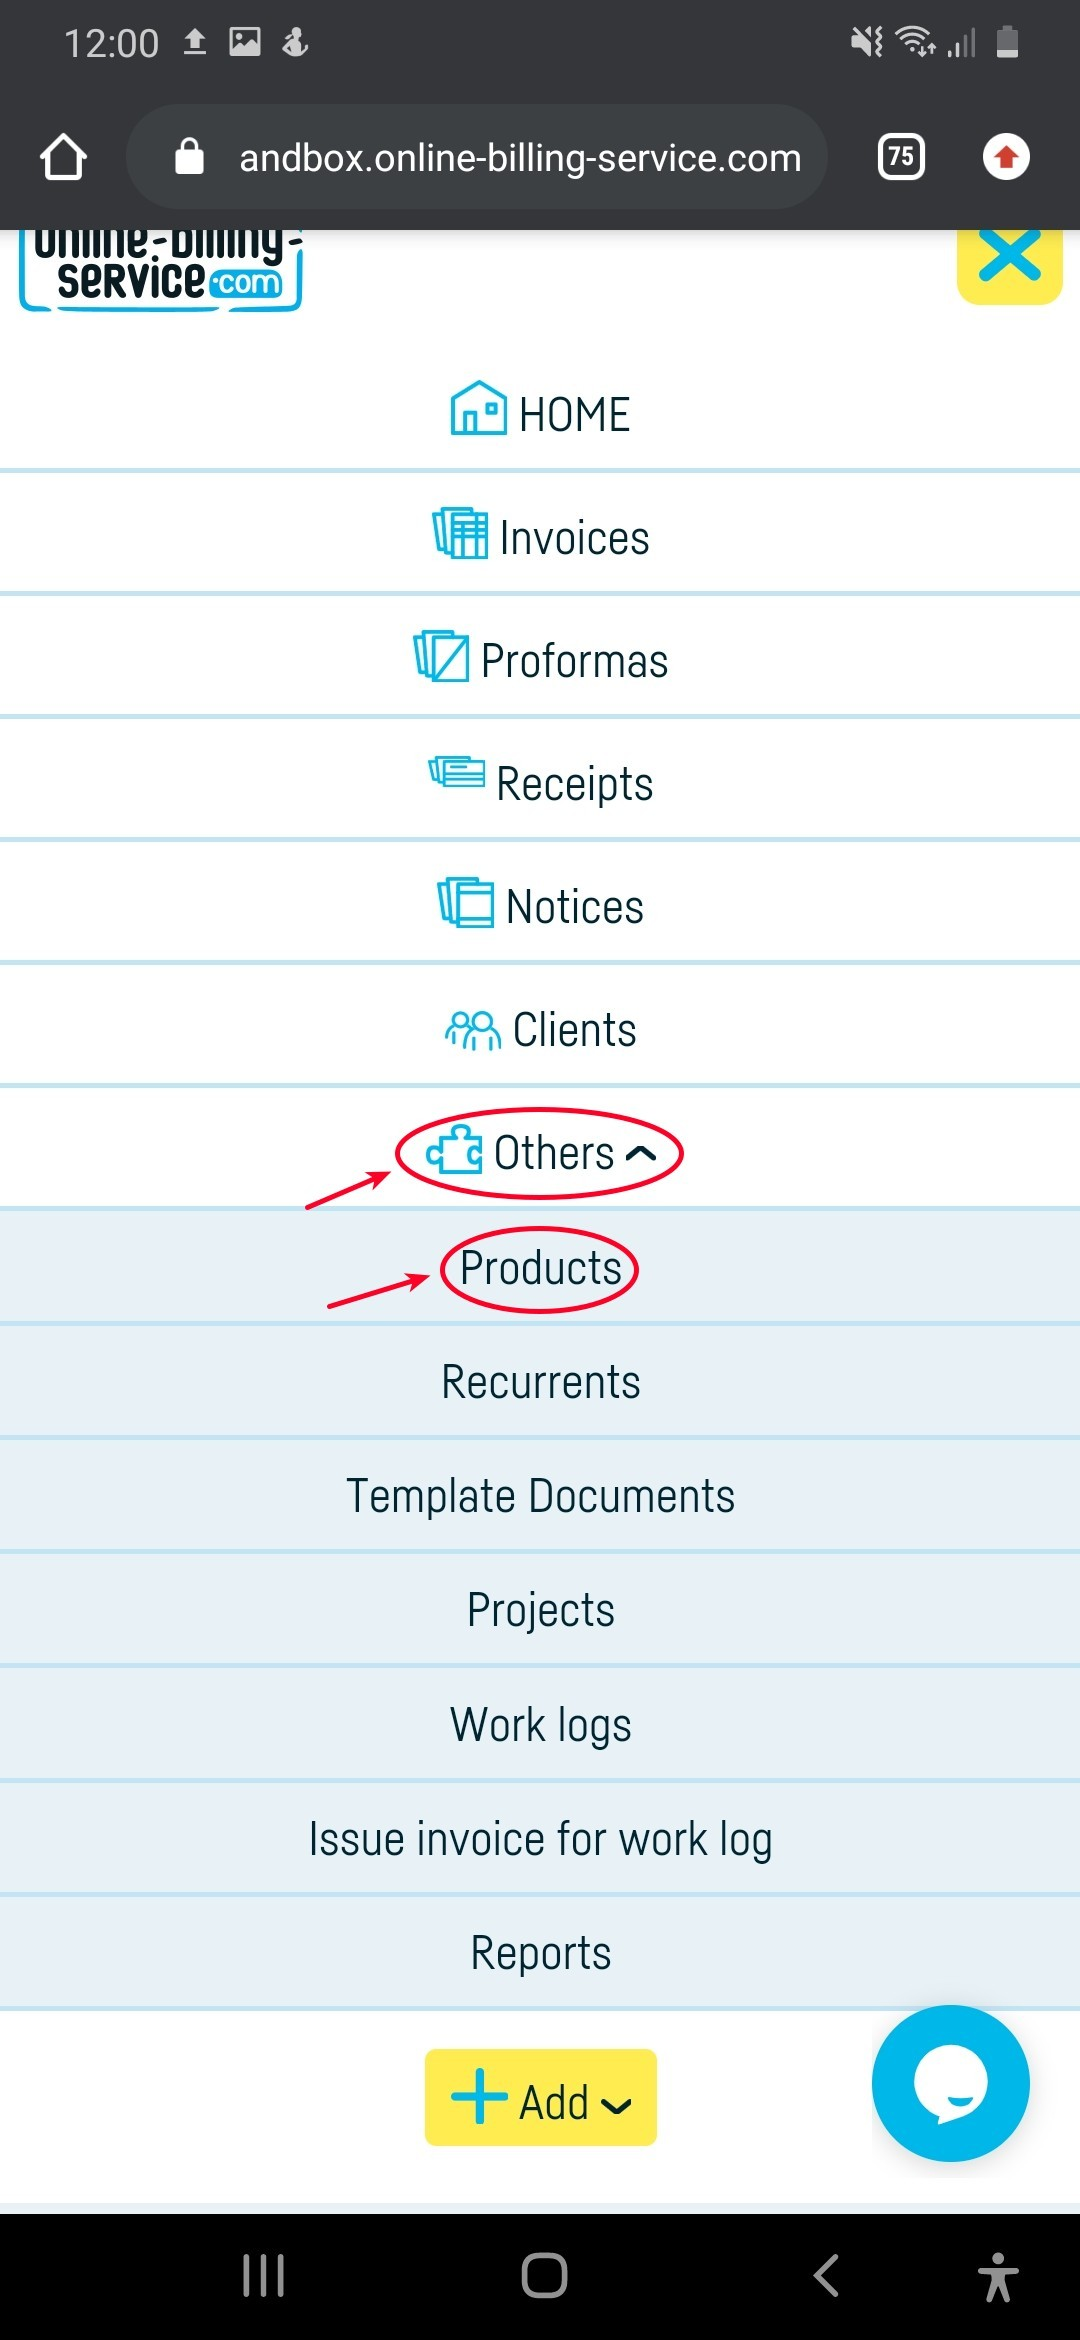 How do I import a product or services list? - step 1